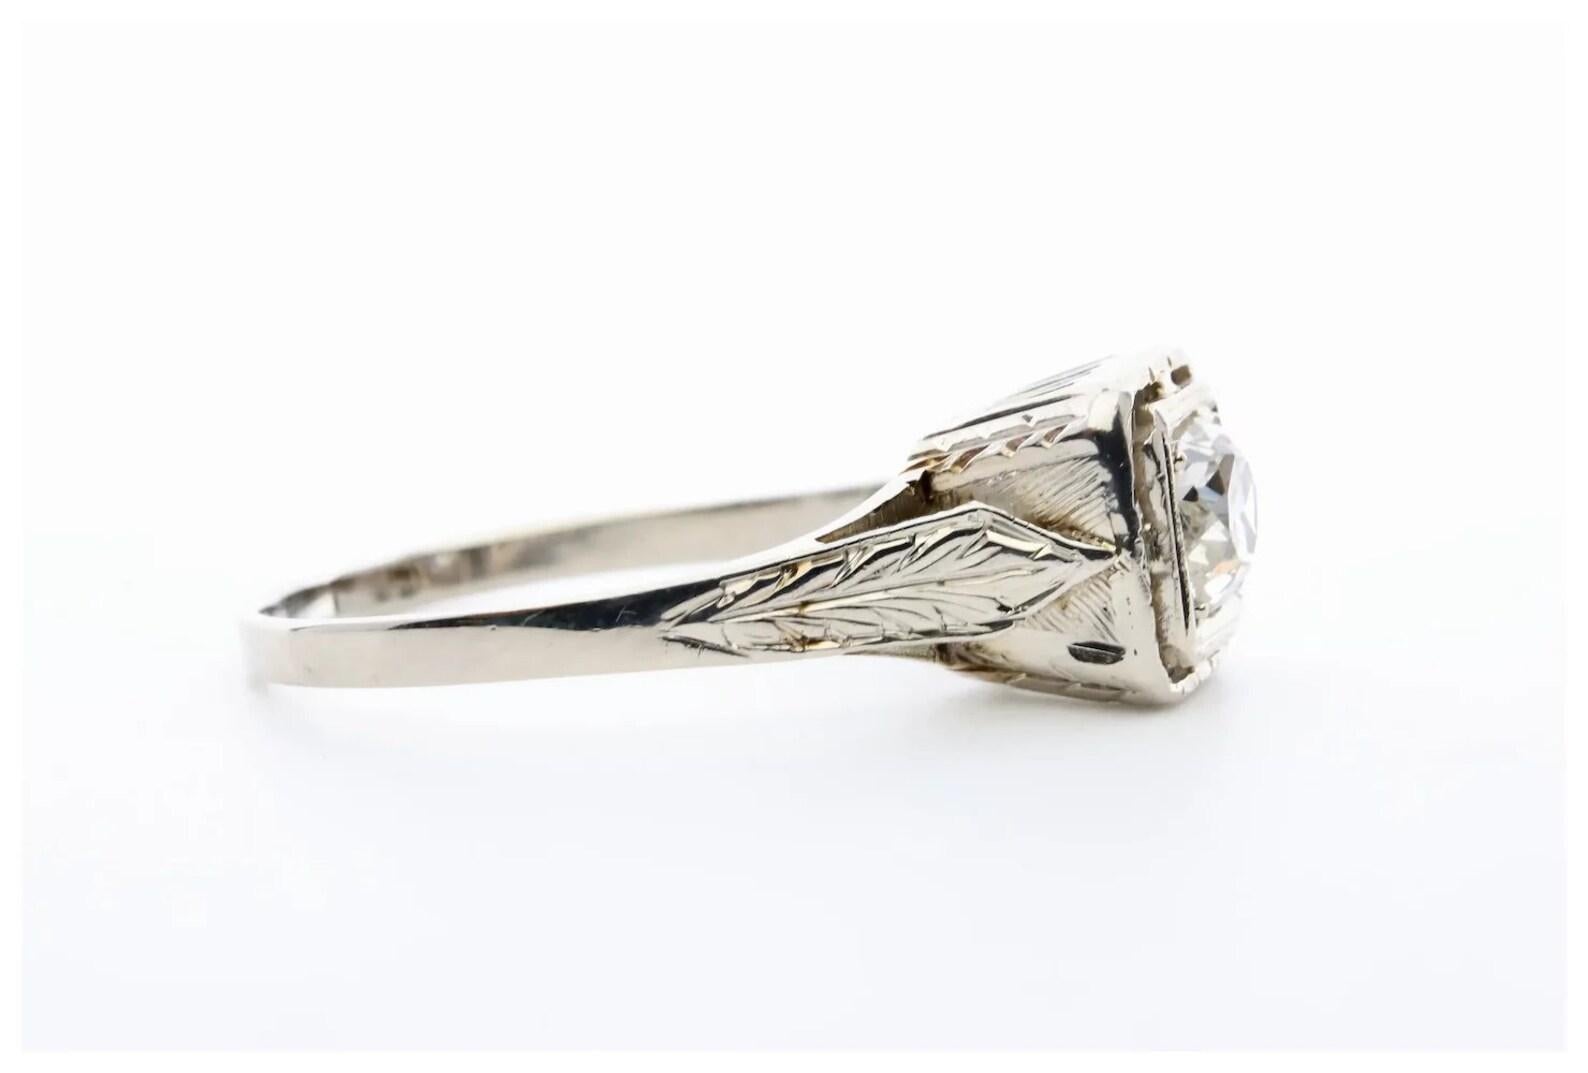 A handmade Art Deco period diamond solitaire engagement ring in 14 karat white gold. Centering this ring is a 0.52 carat old mine cut diamond of H color, SI1 clarity. The mounting features pierced filigree work complemented by hand engraved